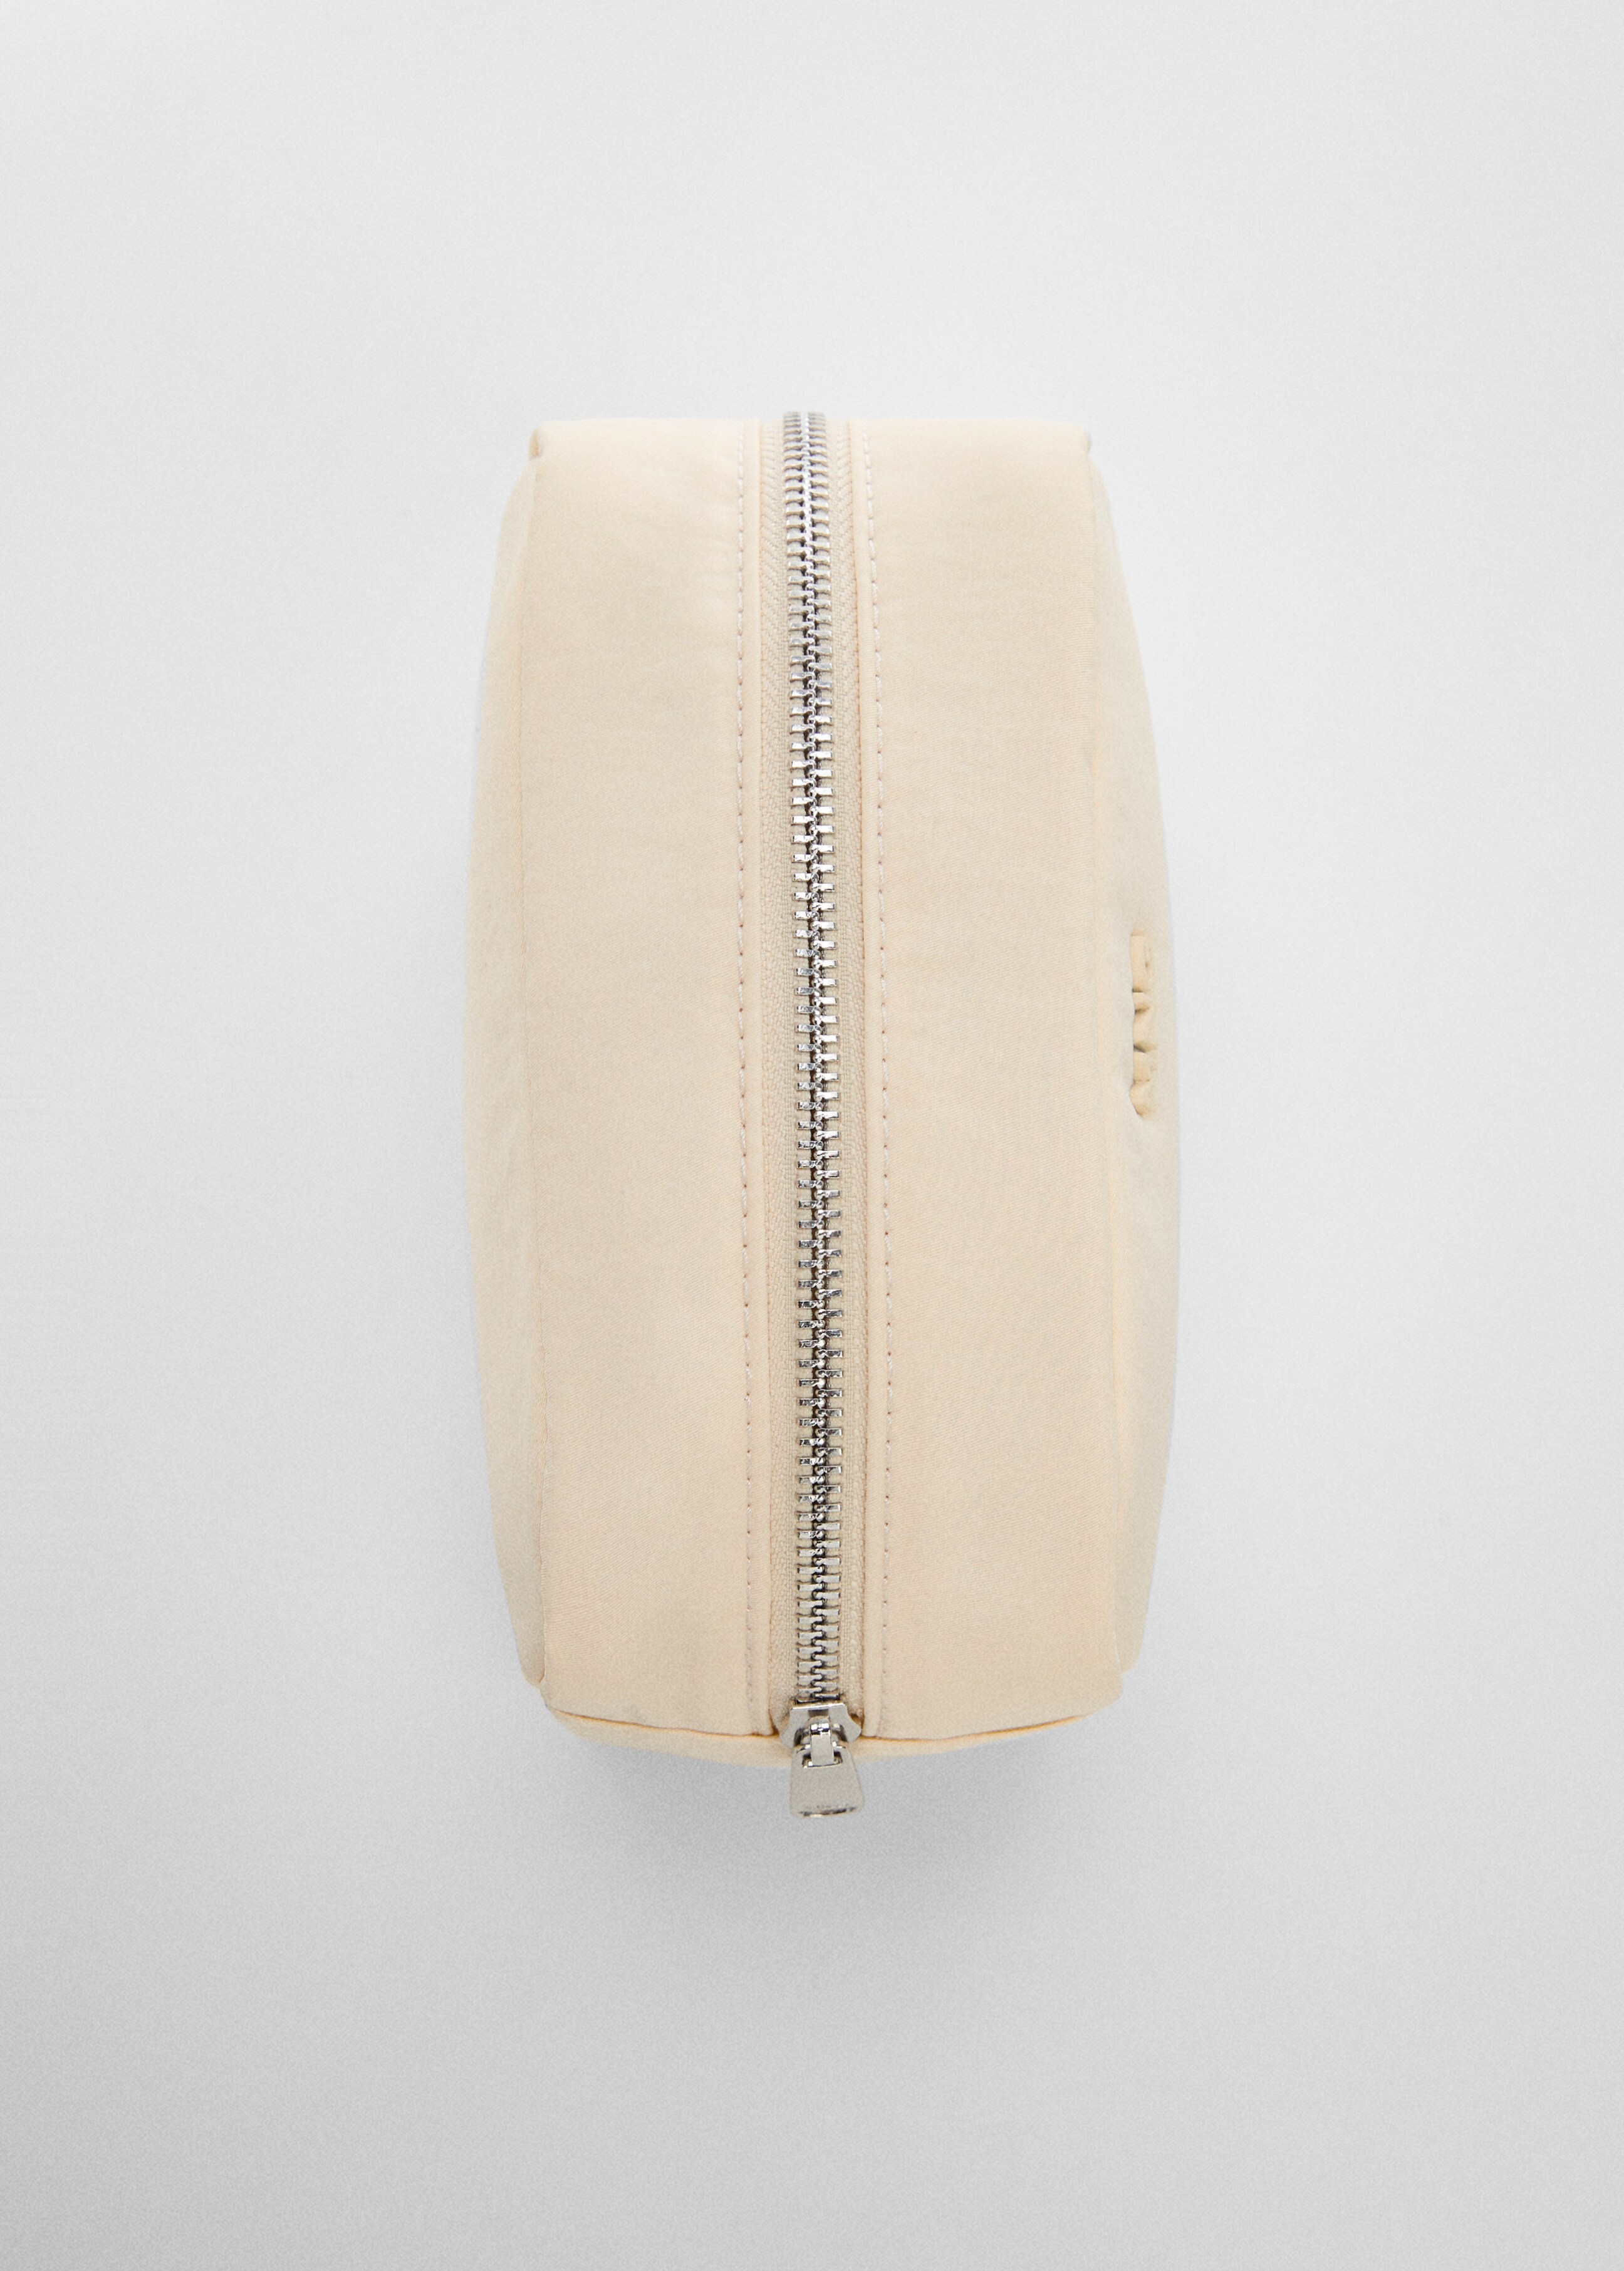 Zipped toiletry bag with logo - Details of the article 1